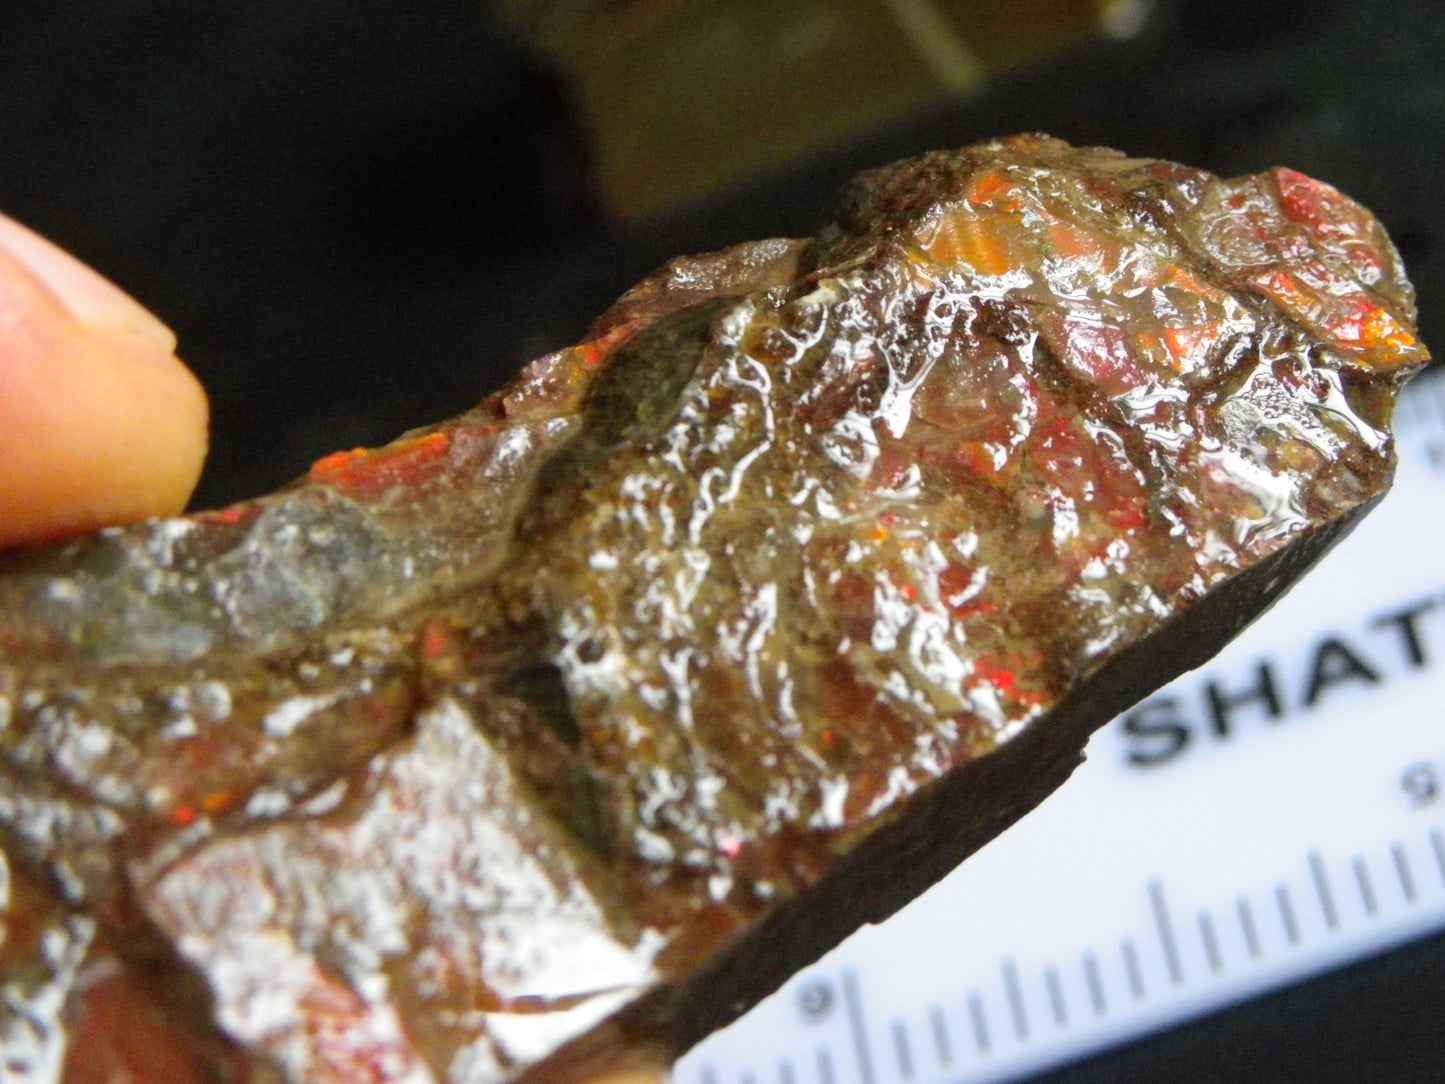 Nice Larger Red Ammolite Rough Specimens 821cts Alberta Canada :)